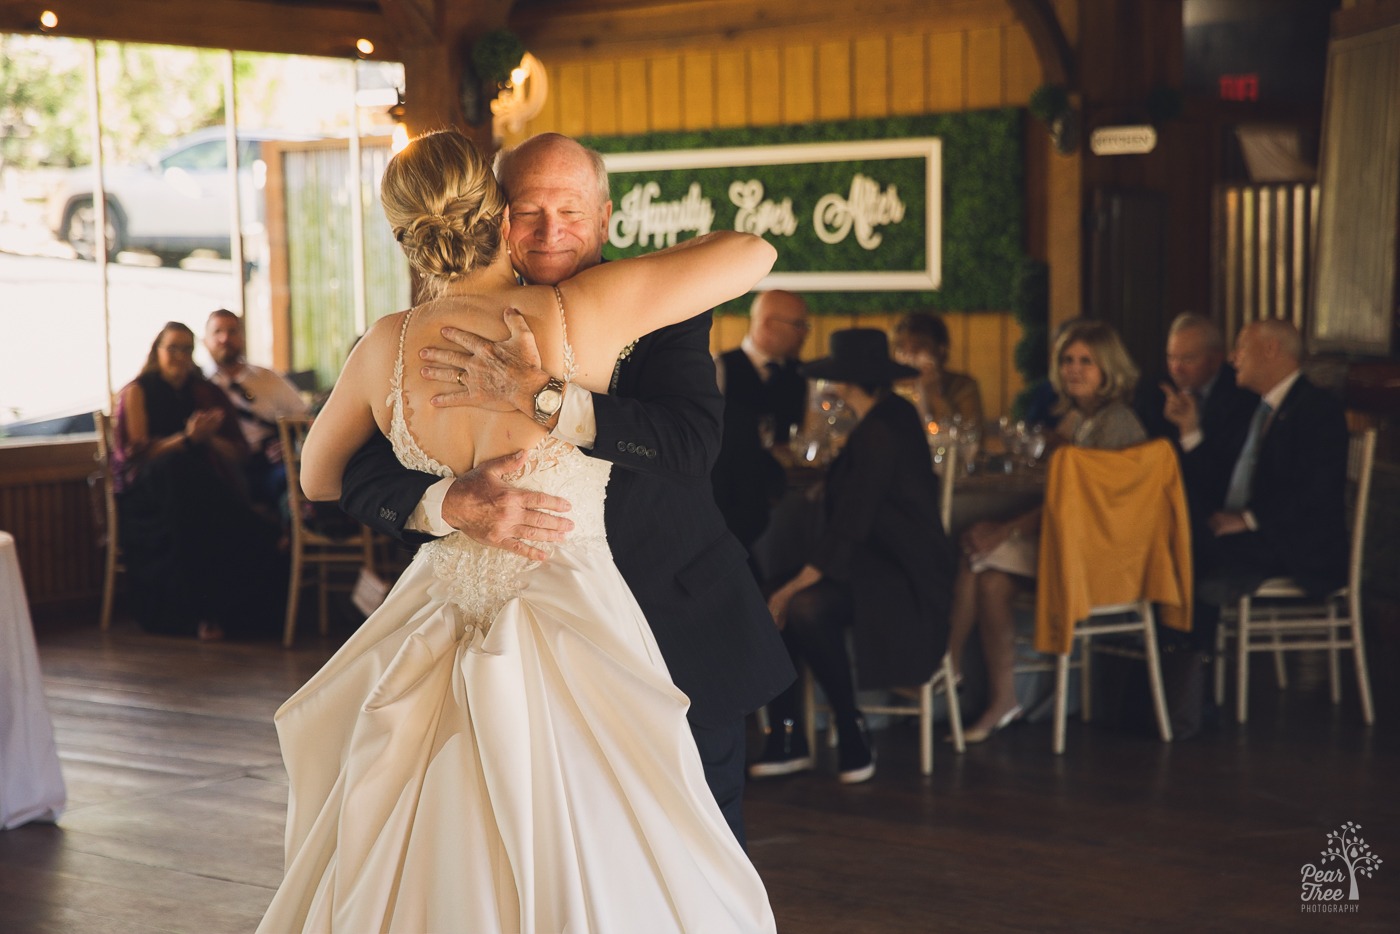 Father hugging his daughter close at the end of their dance on her wedding day